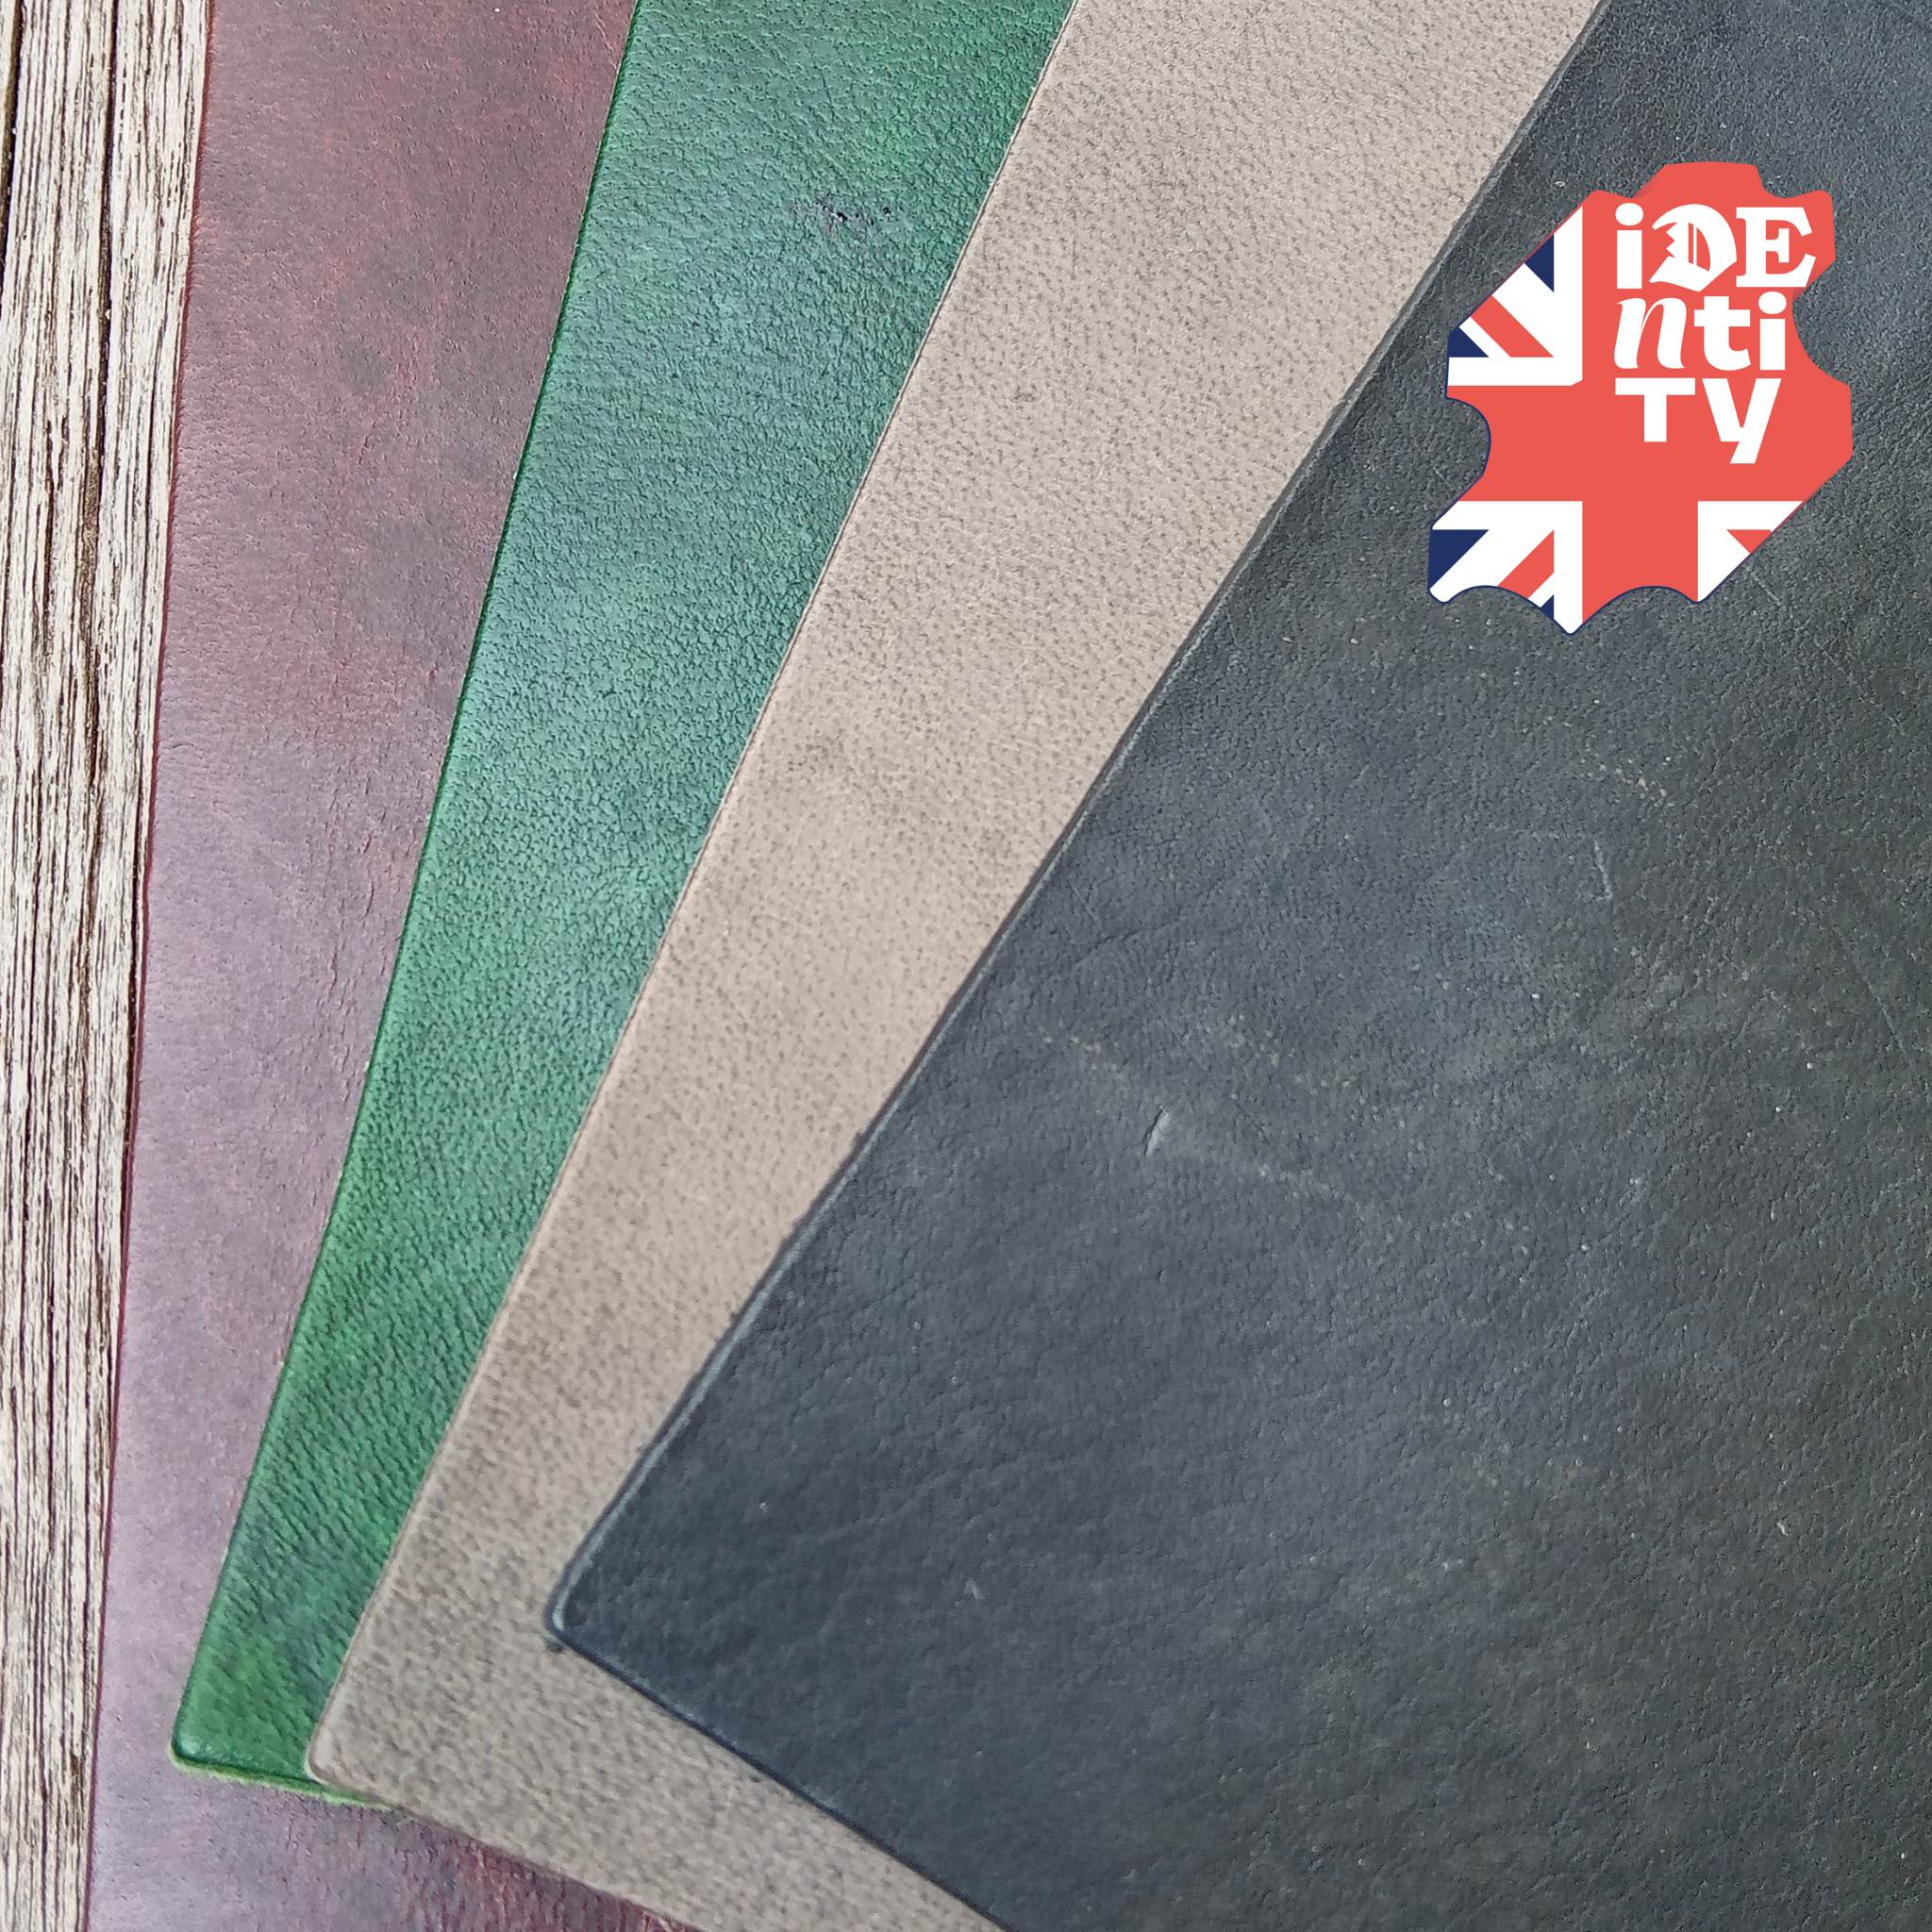 Heritage A3 vegetable tanned leather cuts taken from the Heritage collection of leather sourced from the old Clayton's tannery in Chesterfield, ideal for making leather knife sheaths, book covers, wristbands, pouches